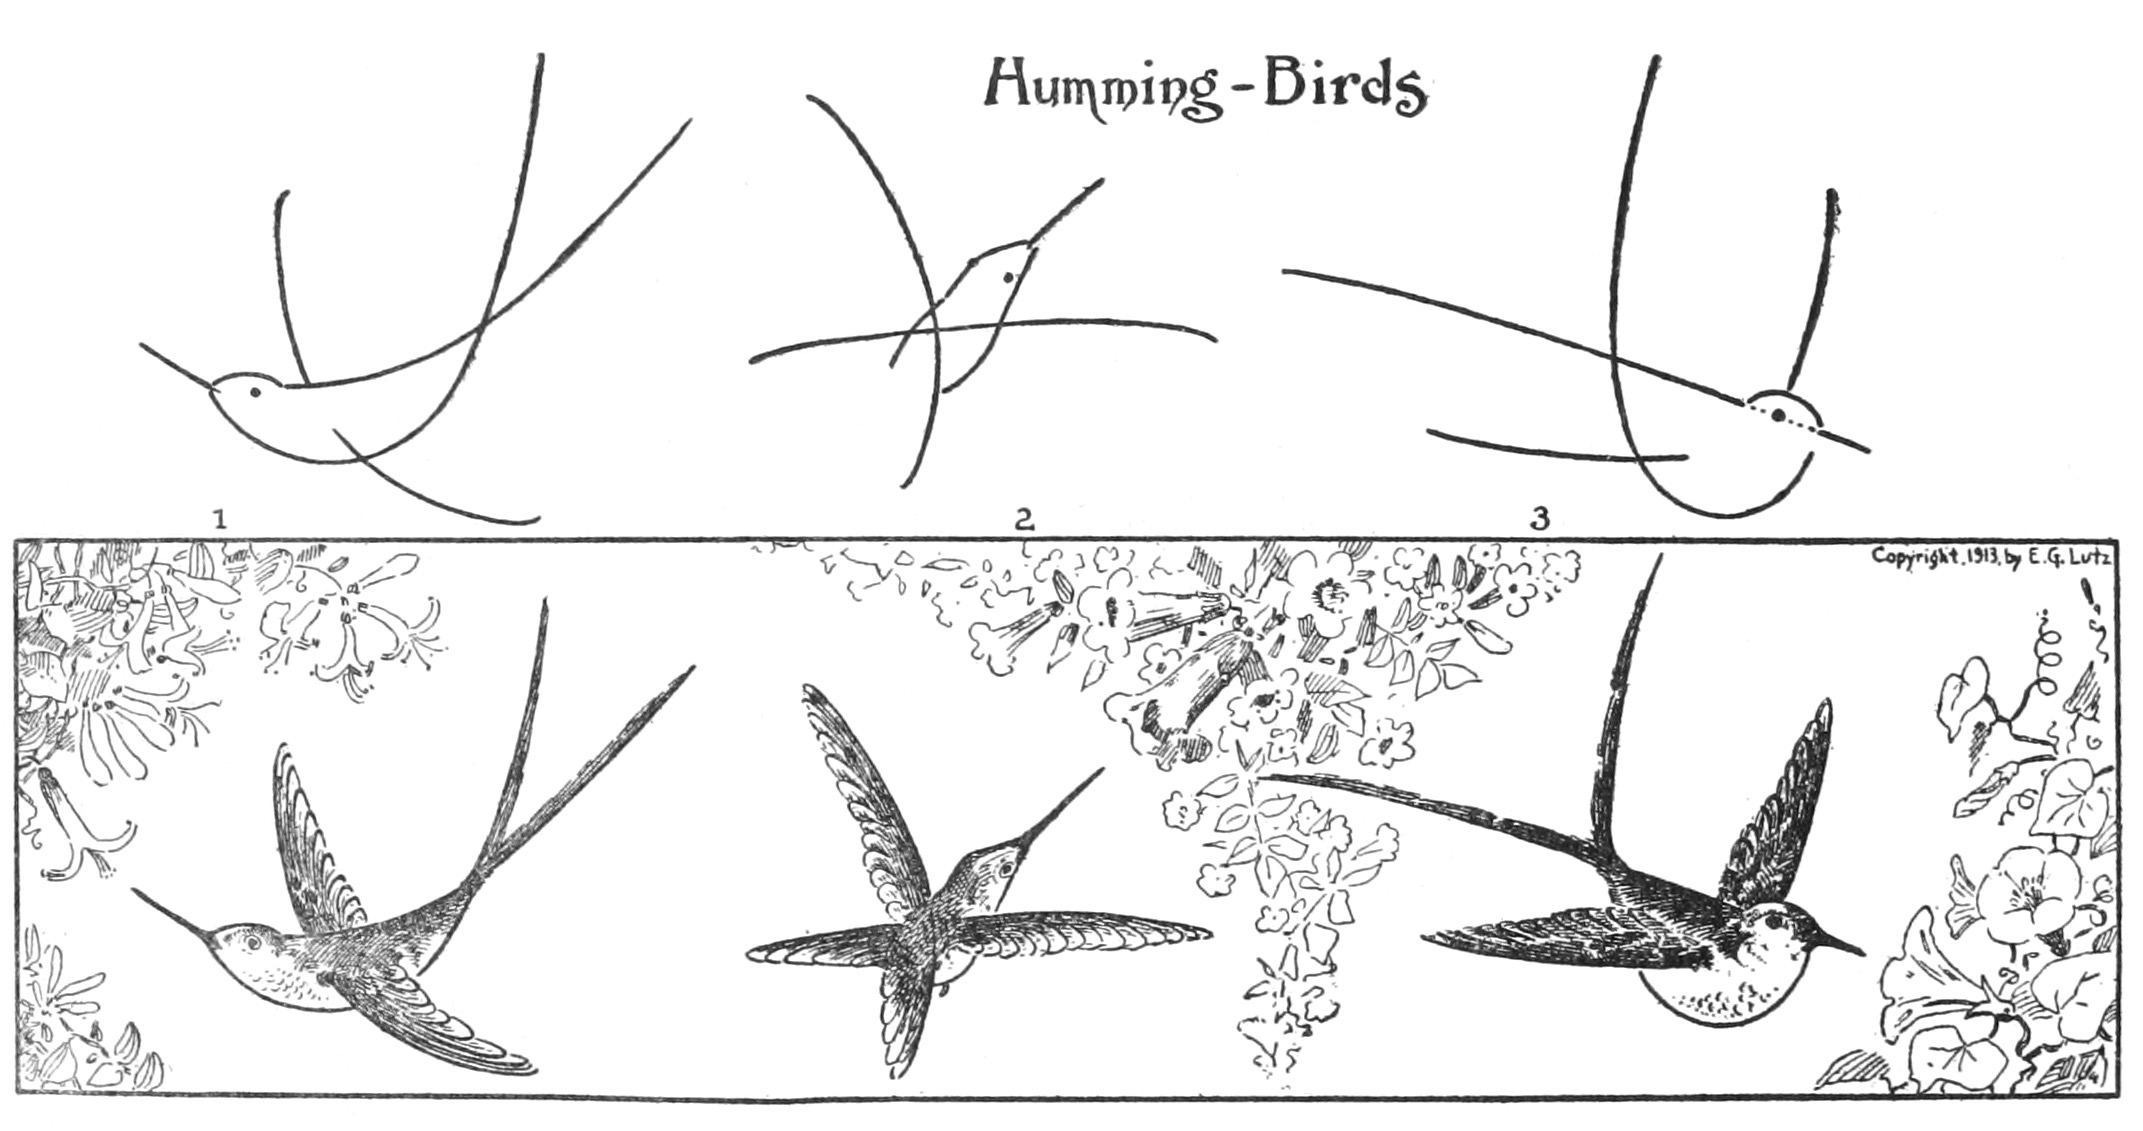 What to Draw and How to Draw it by EG Lutz, 1913